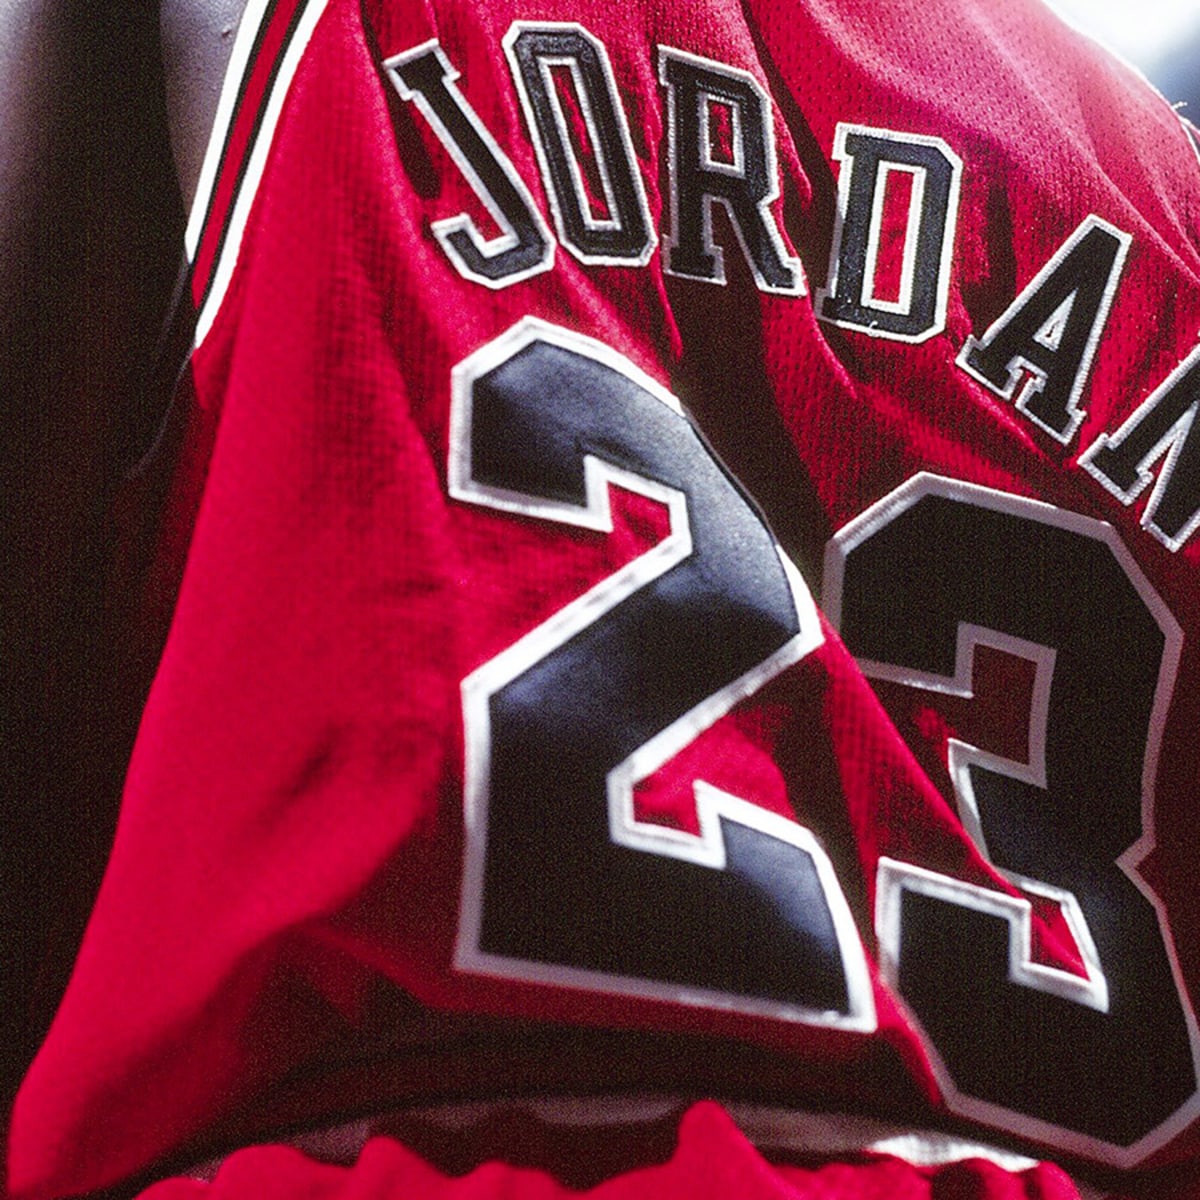 How Michael Jordan became a brand - Los Angeles Times